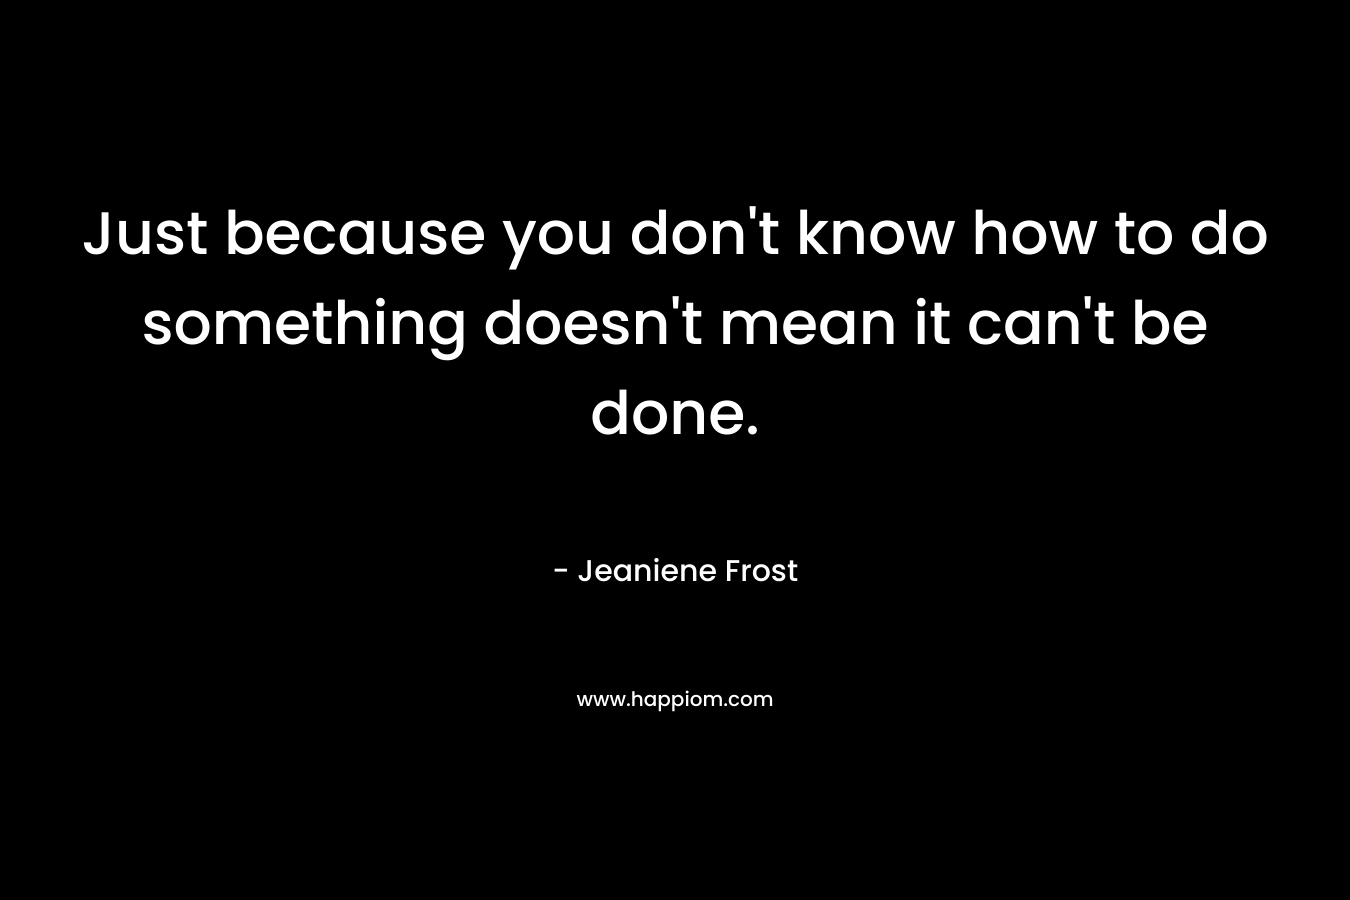 Just because you don’t know how to do something doesn’t mean it can’t be done. – Jeaniene Frost